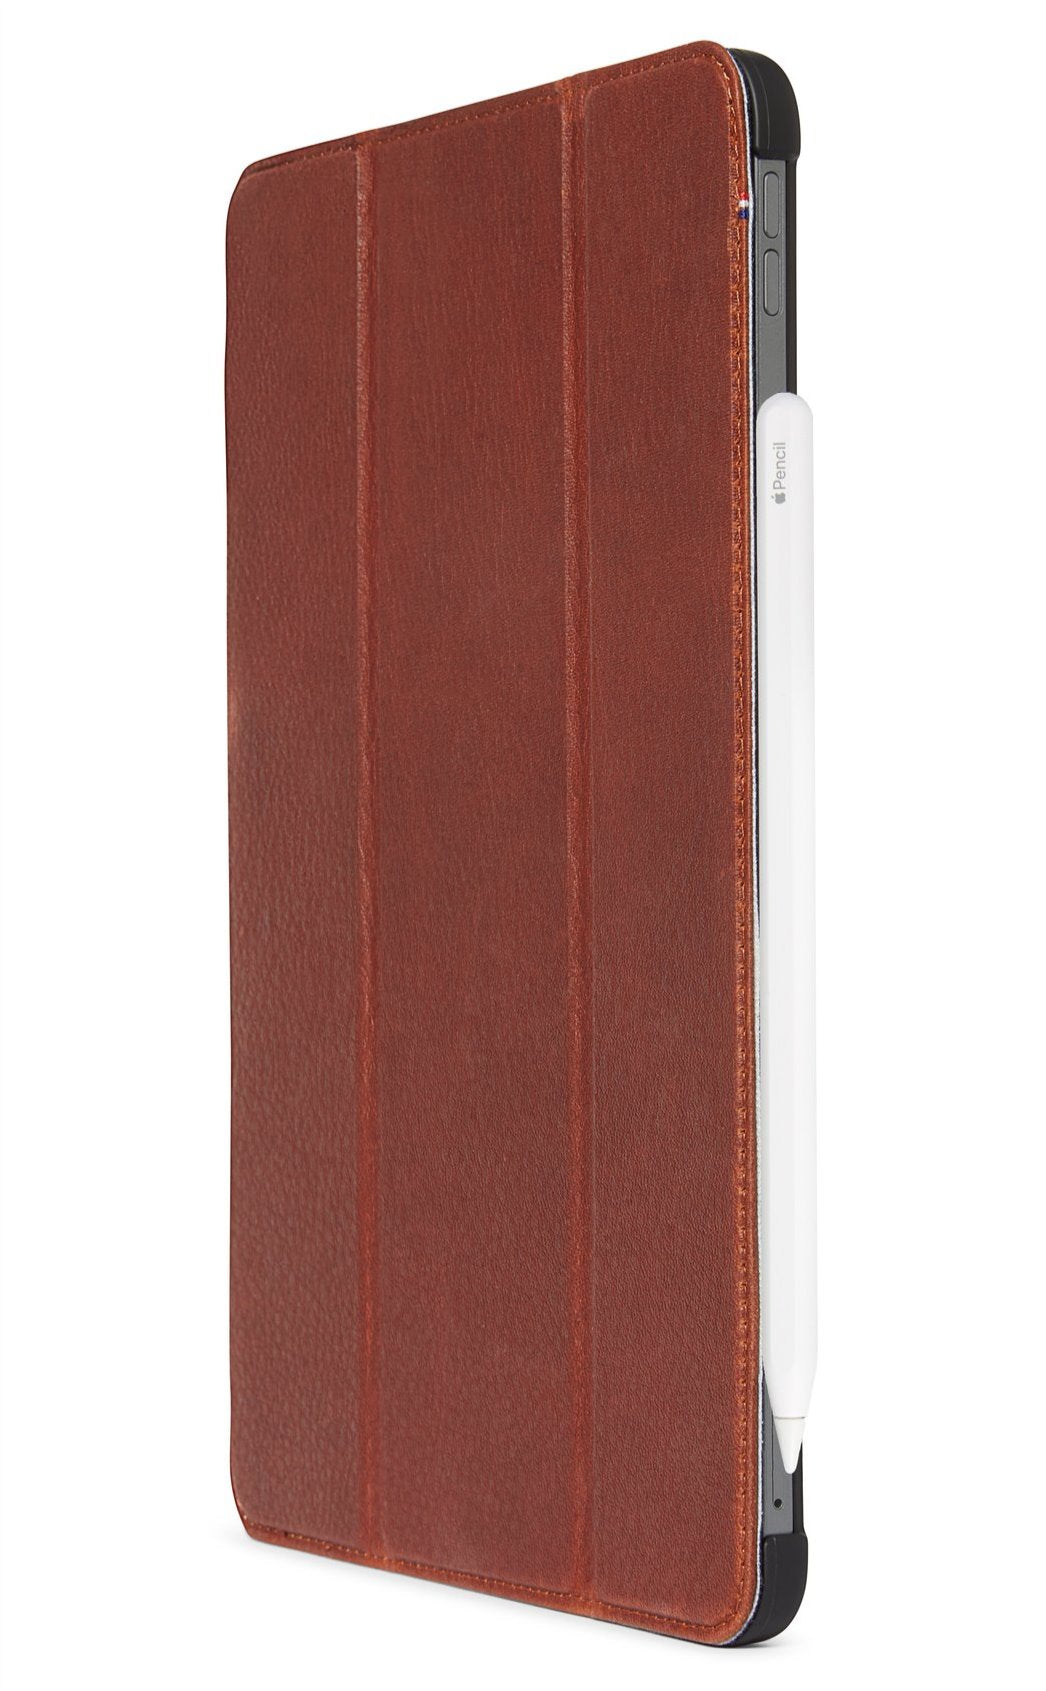 iPad Air 10.9 5th Gen (2022) Leather Case Slim Cover Brown